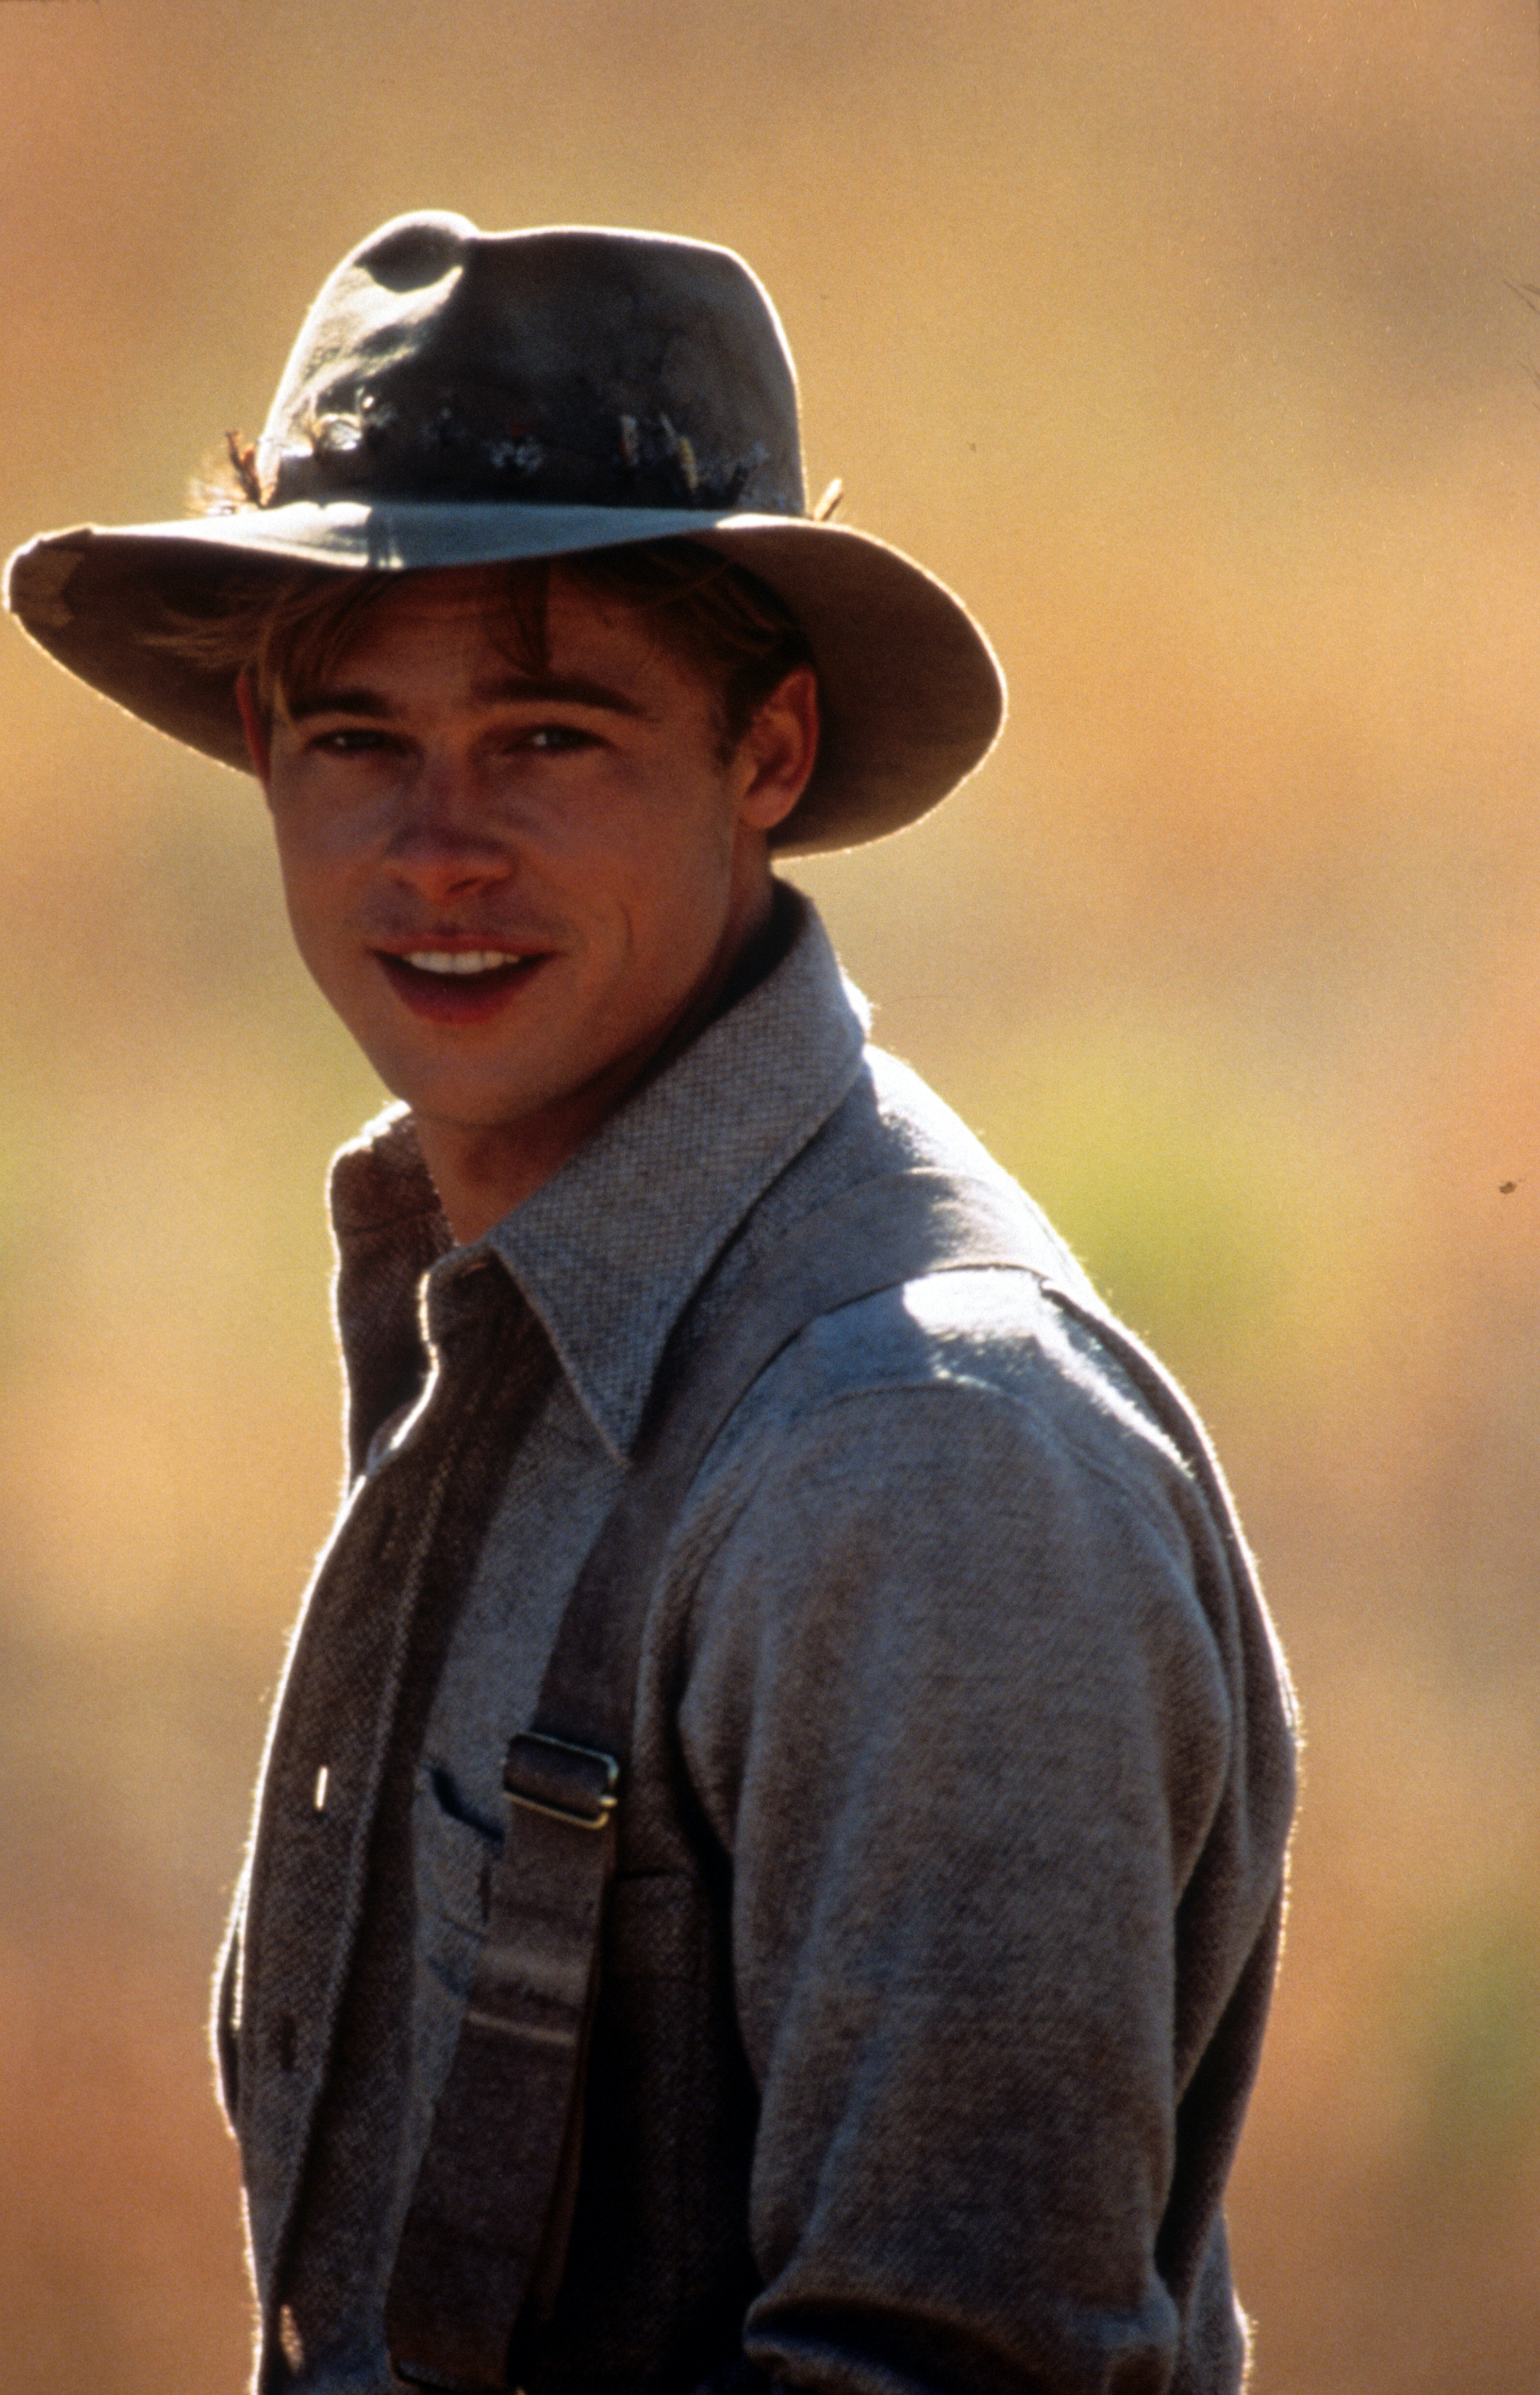 Brad Pitt in "A River Runs Through It" in 1992 | Source: Getty Images